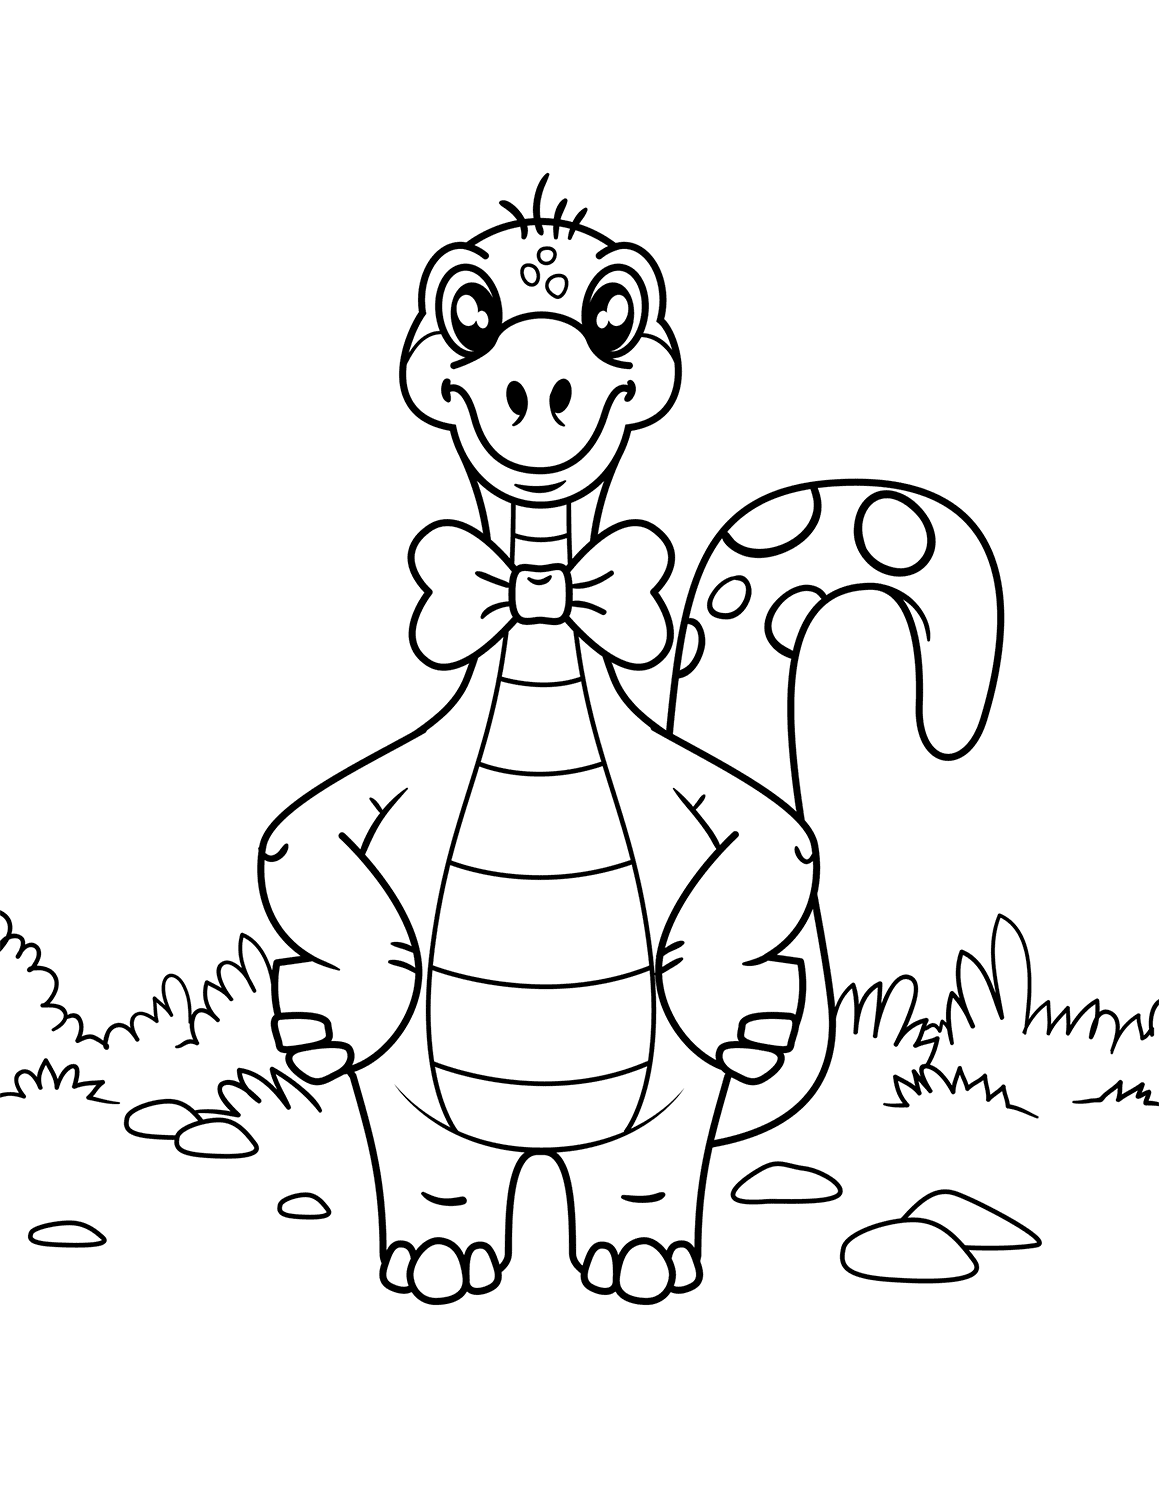 Dinosaur wearing bow tie Coloring Page